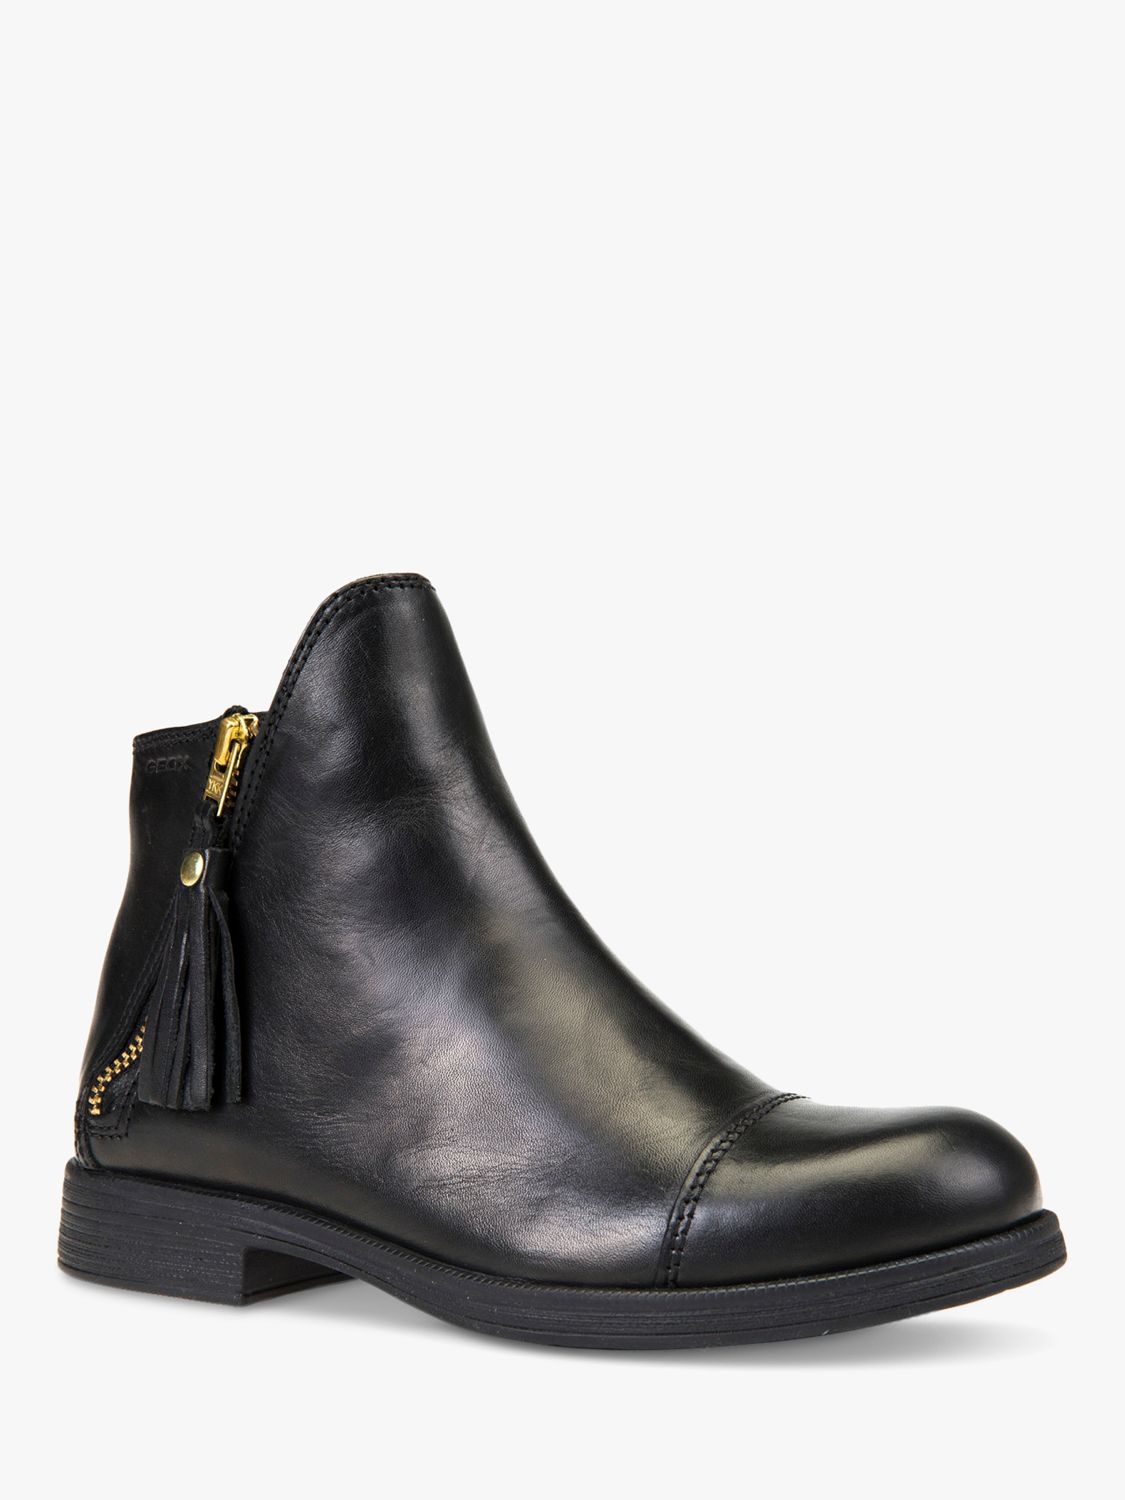 Buy Geox Kids' Agata Leather Boots Online at johnlewis.com